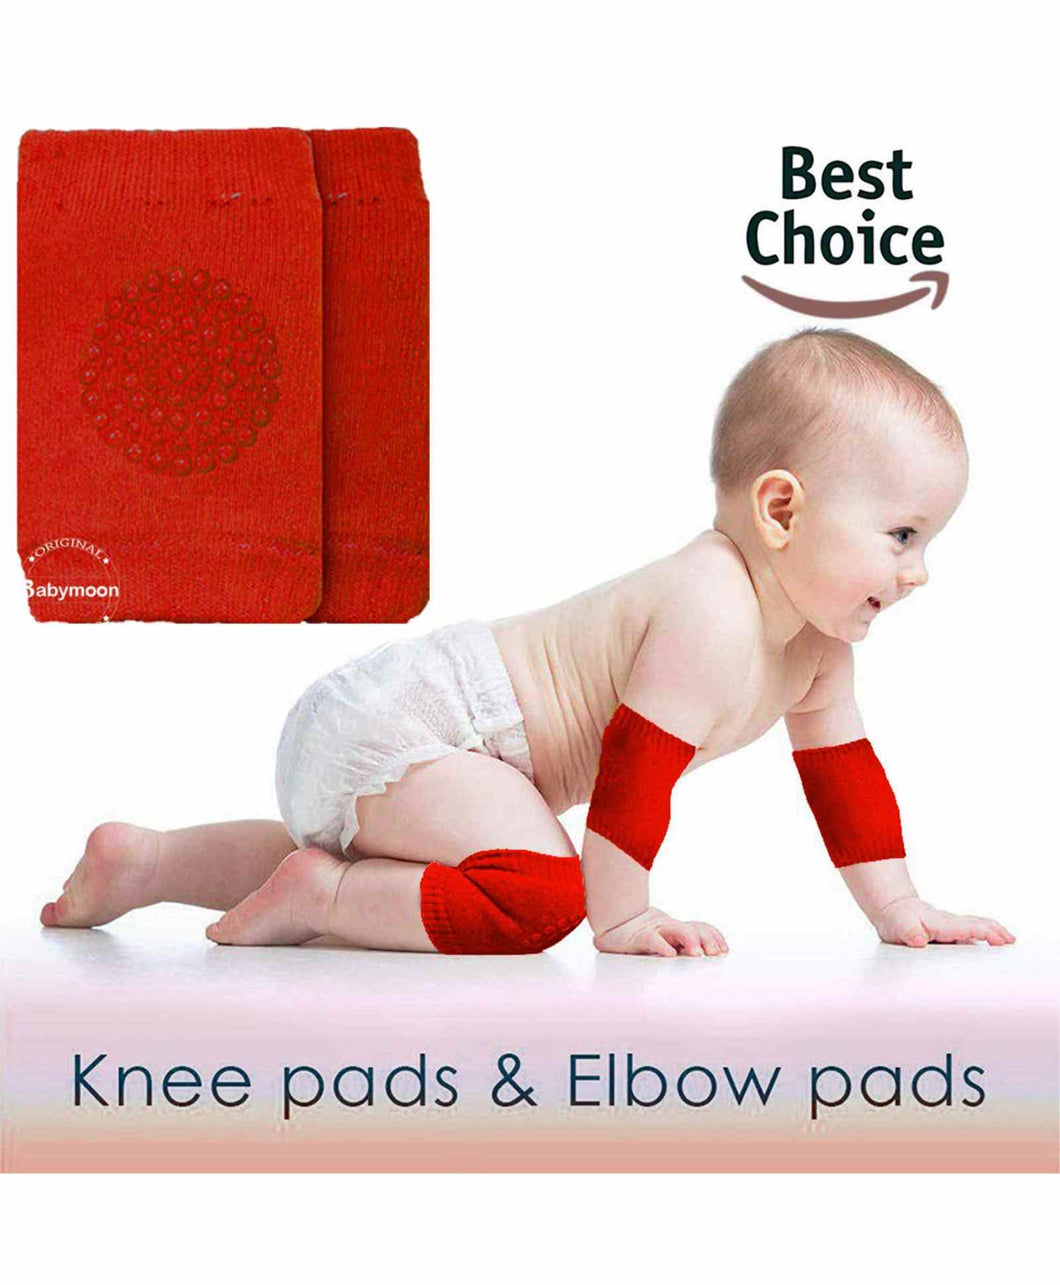 Babymoon Baby Kids Knee Pads AntiSlip Stretchable Knee Cap Elbow Safety - Red